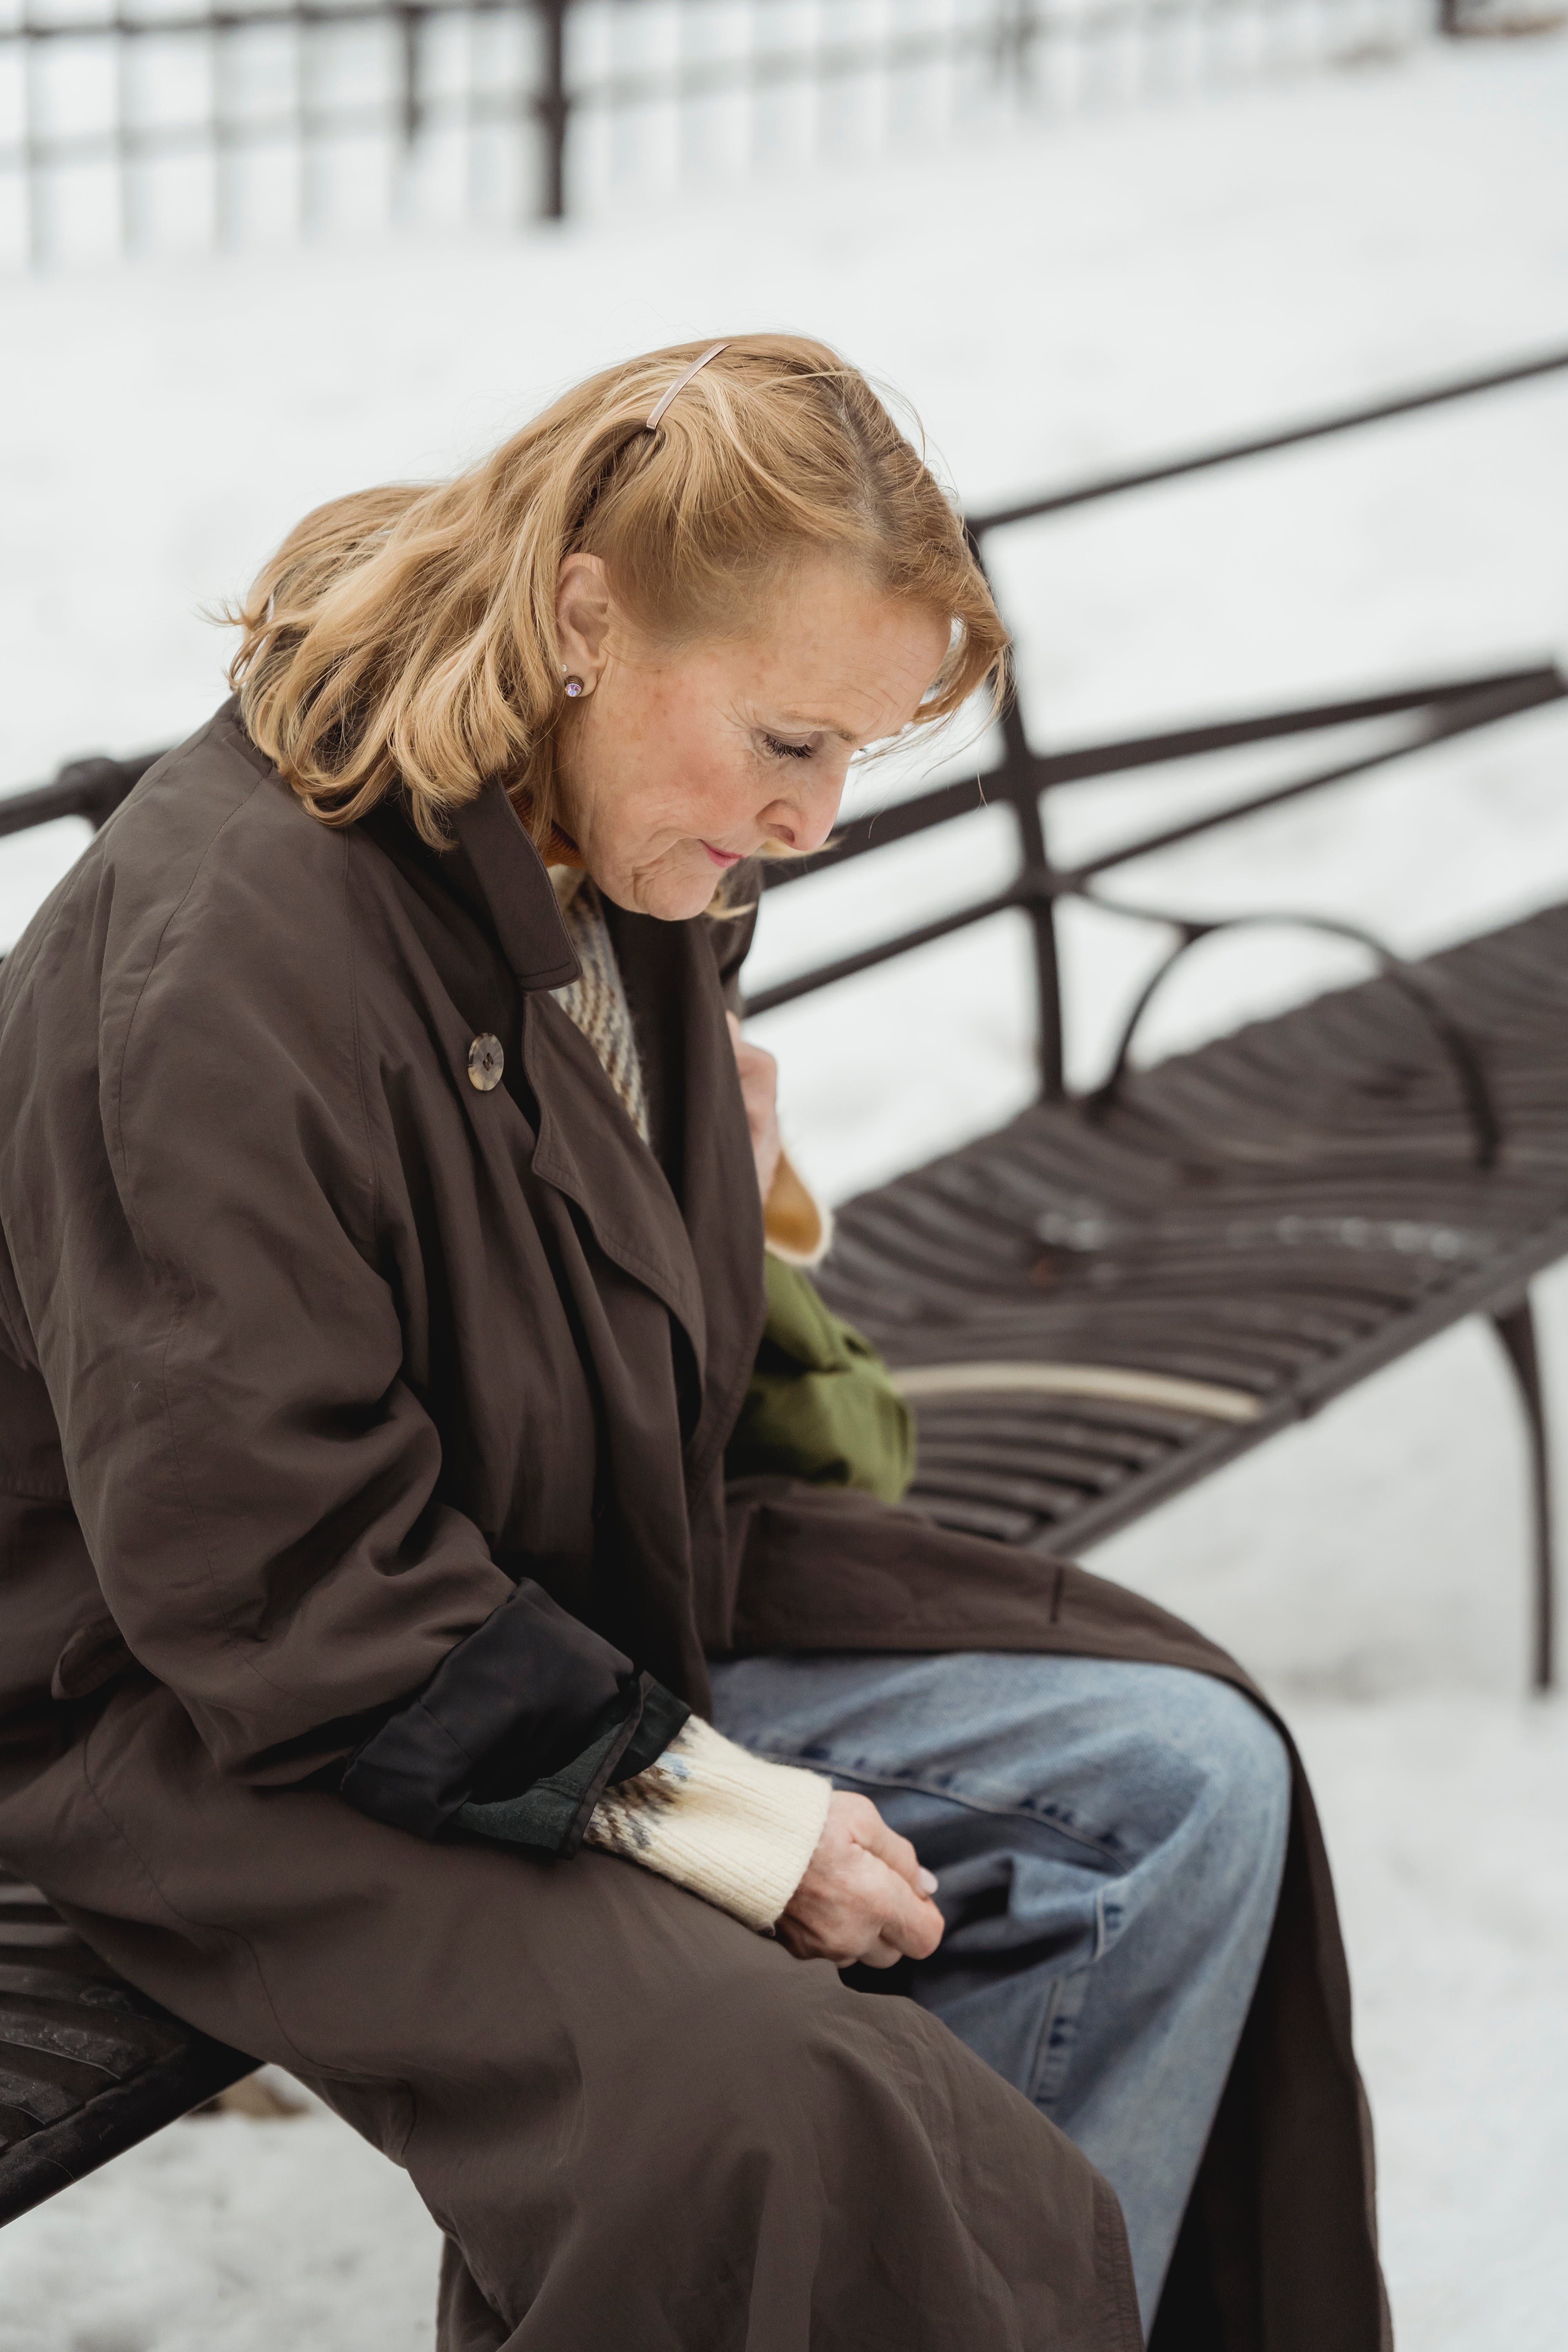 An unhappy woman resting on a bench. | Source: Pexels